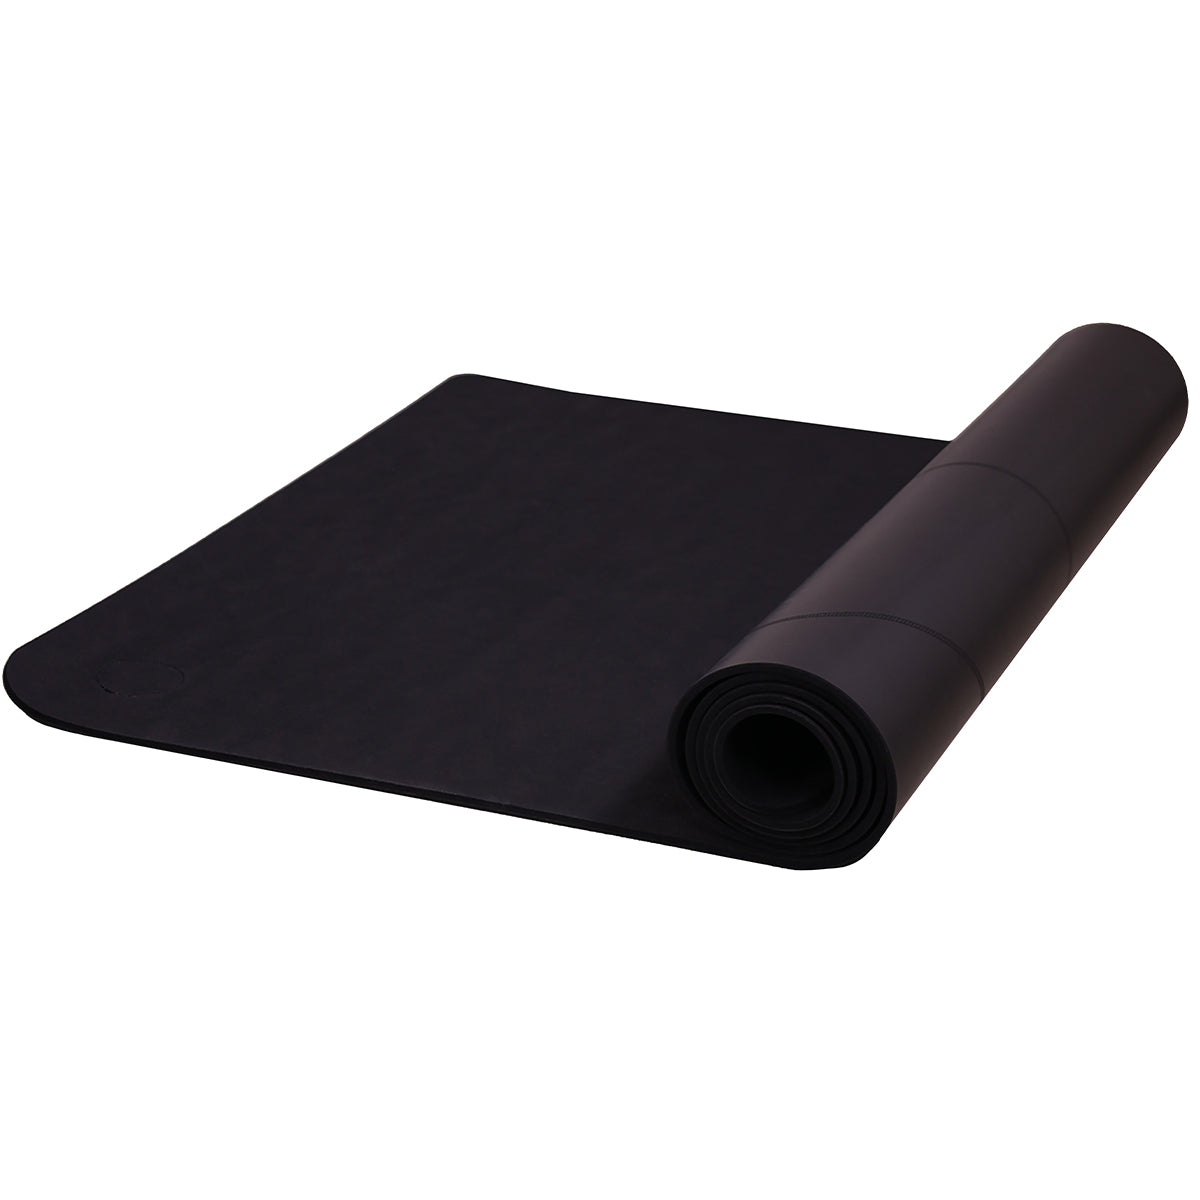 After Sale Yesoul Yoga Mat(not for customer)